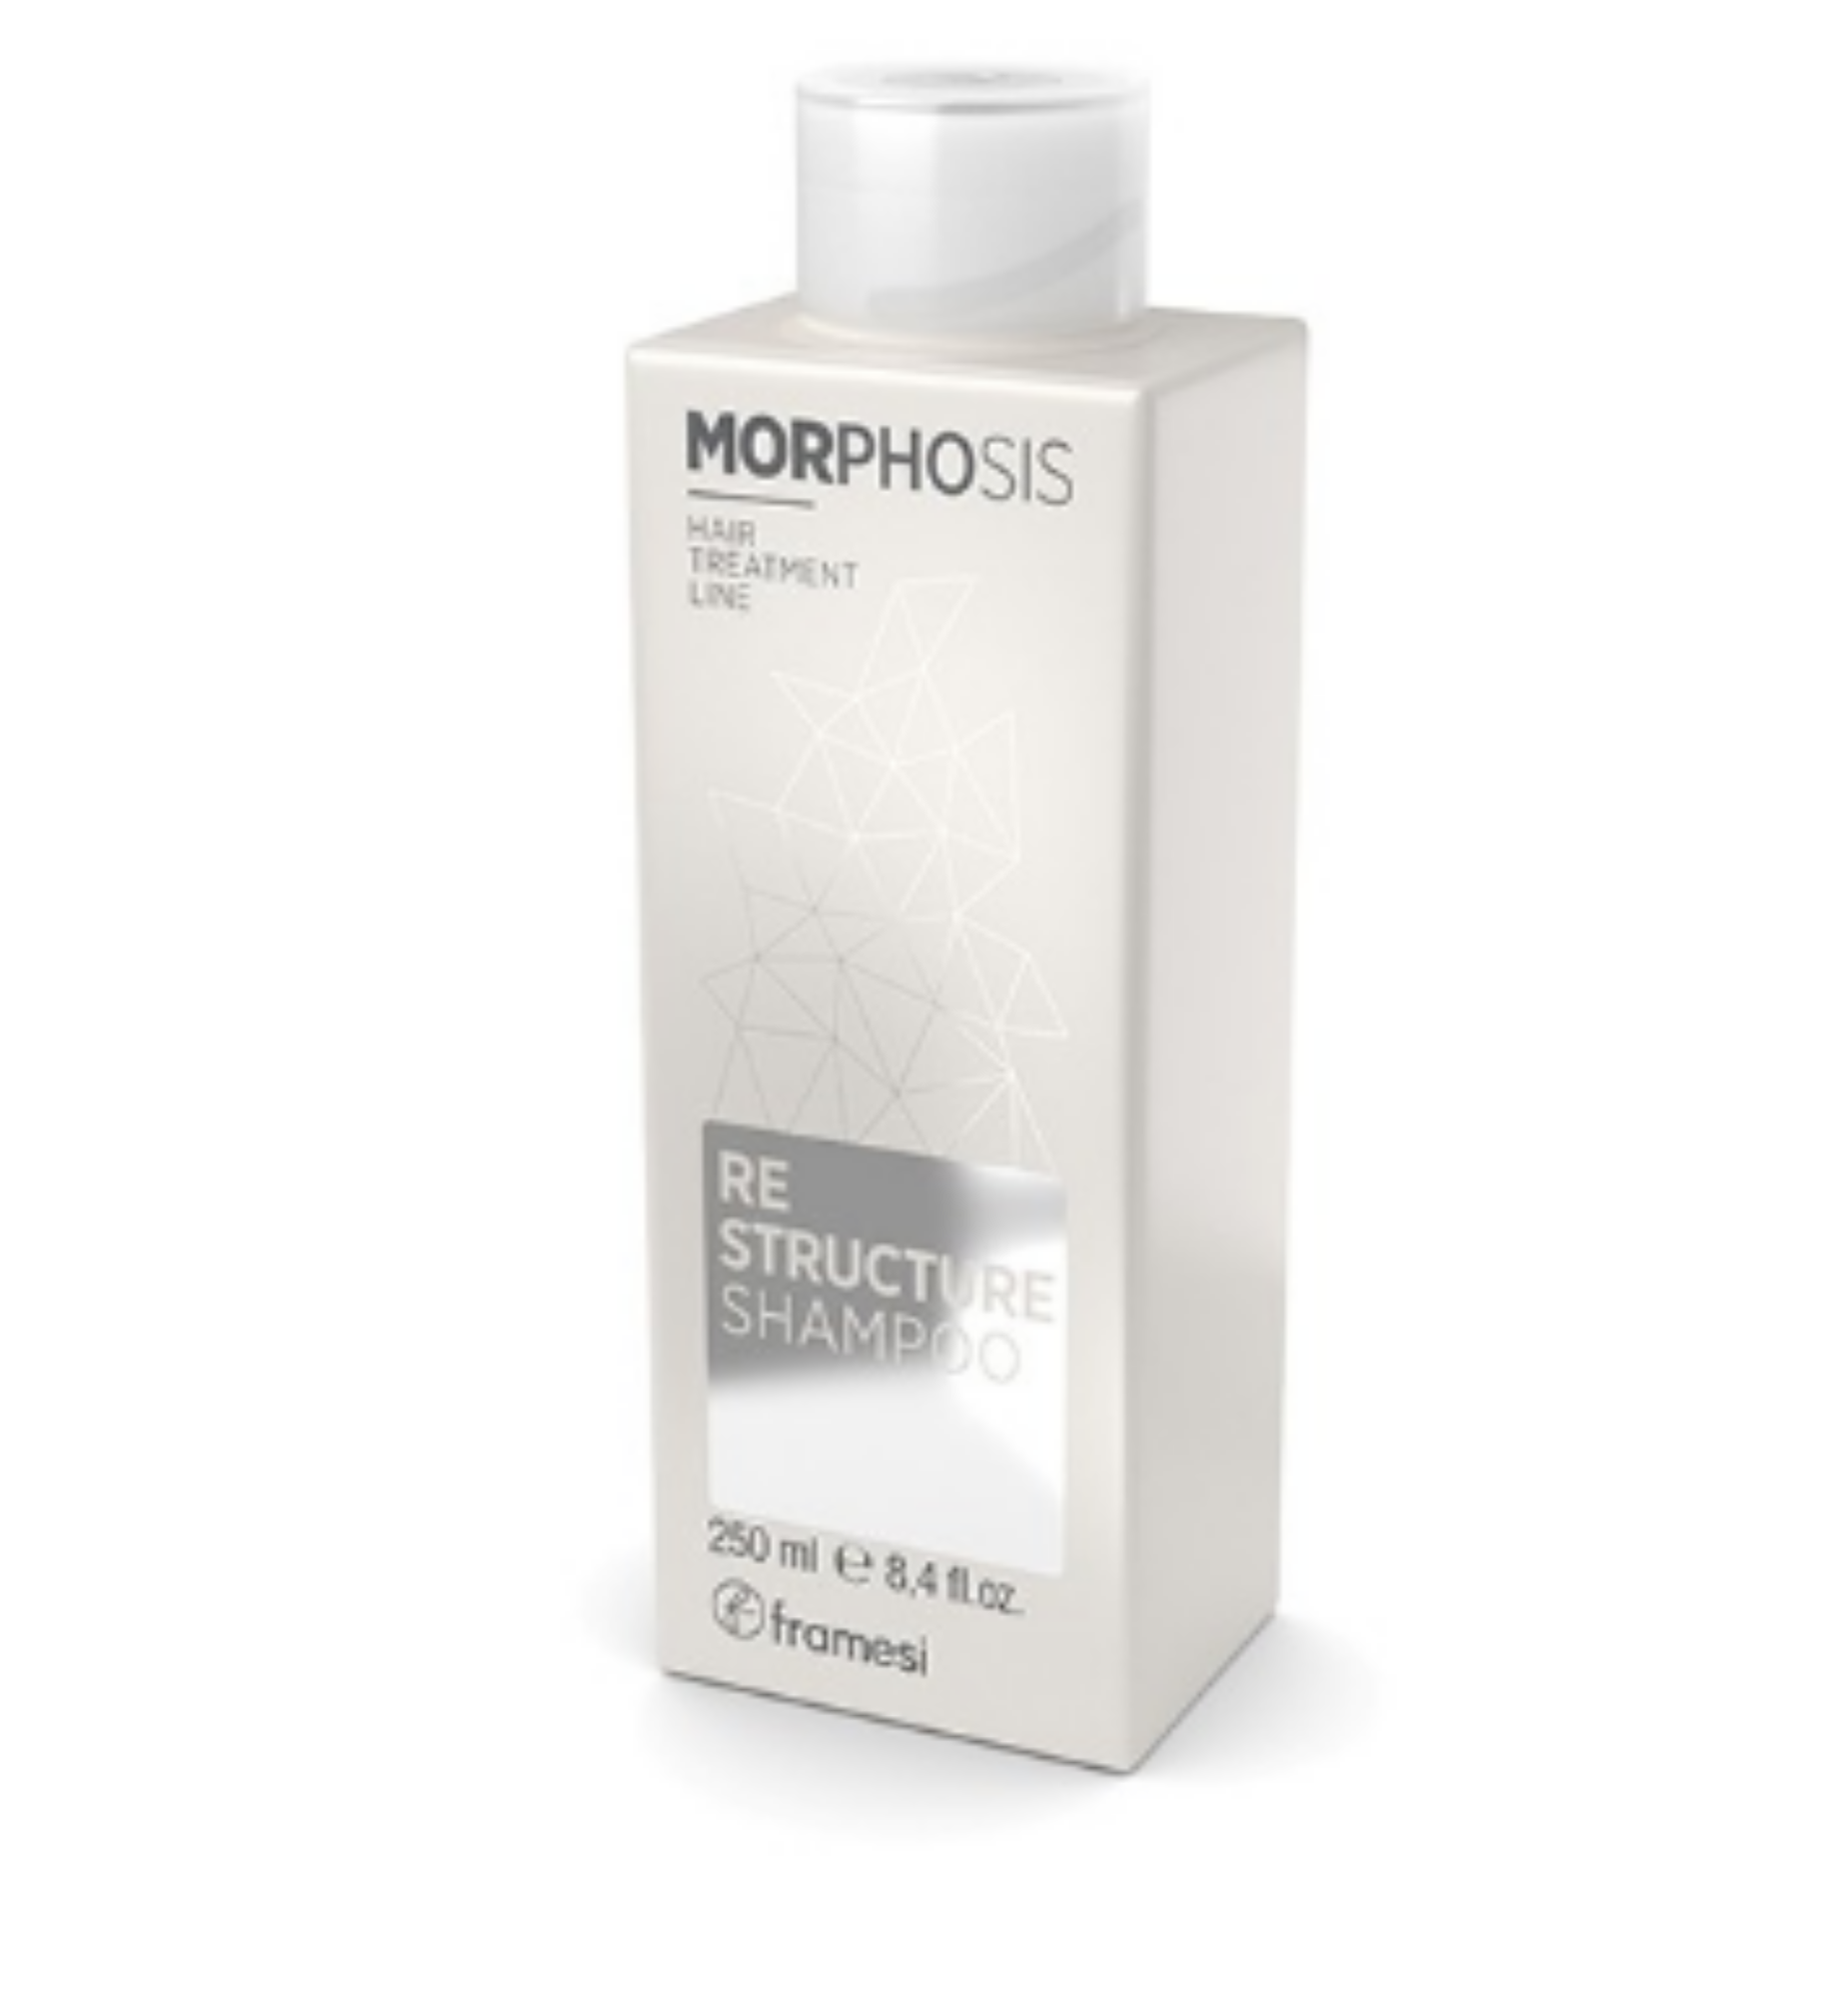 RE-STRUCTURE SHAMPOO